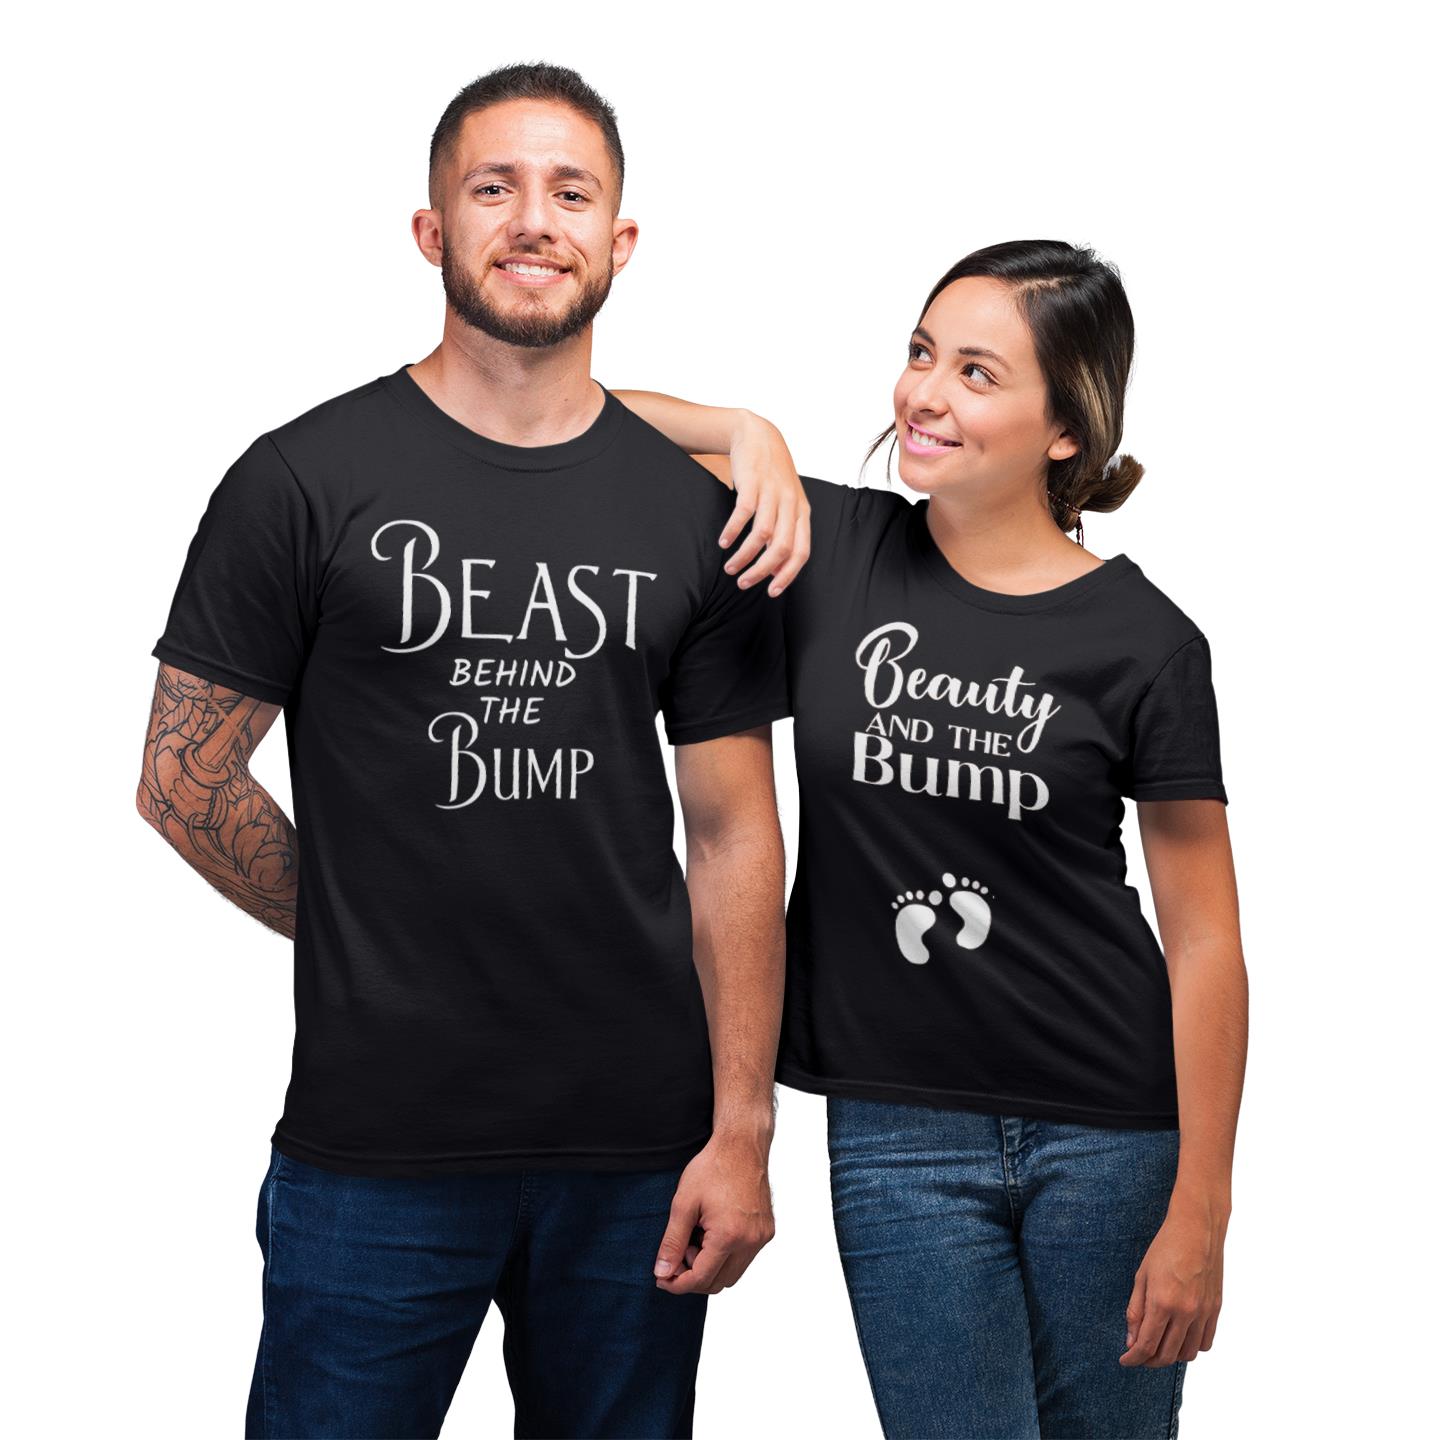 Matching Beauty And The Bump Beast Behind The Bump Shirts For